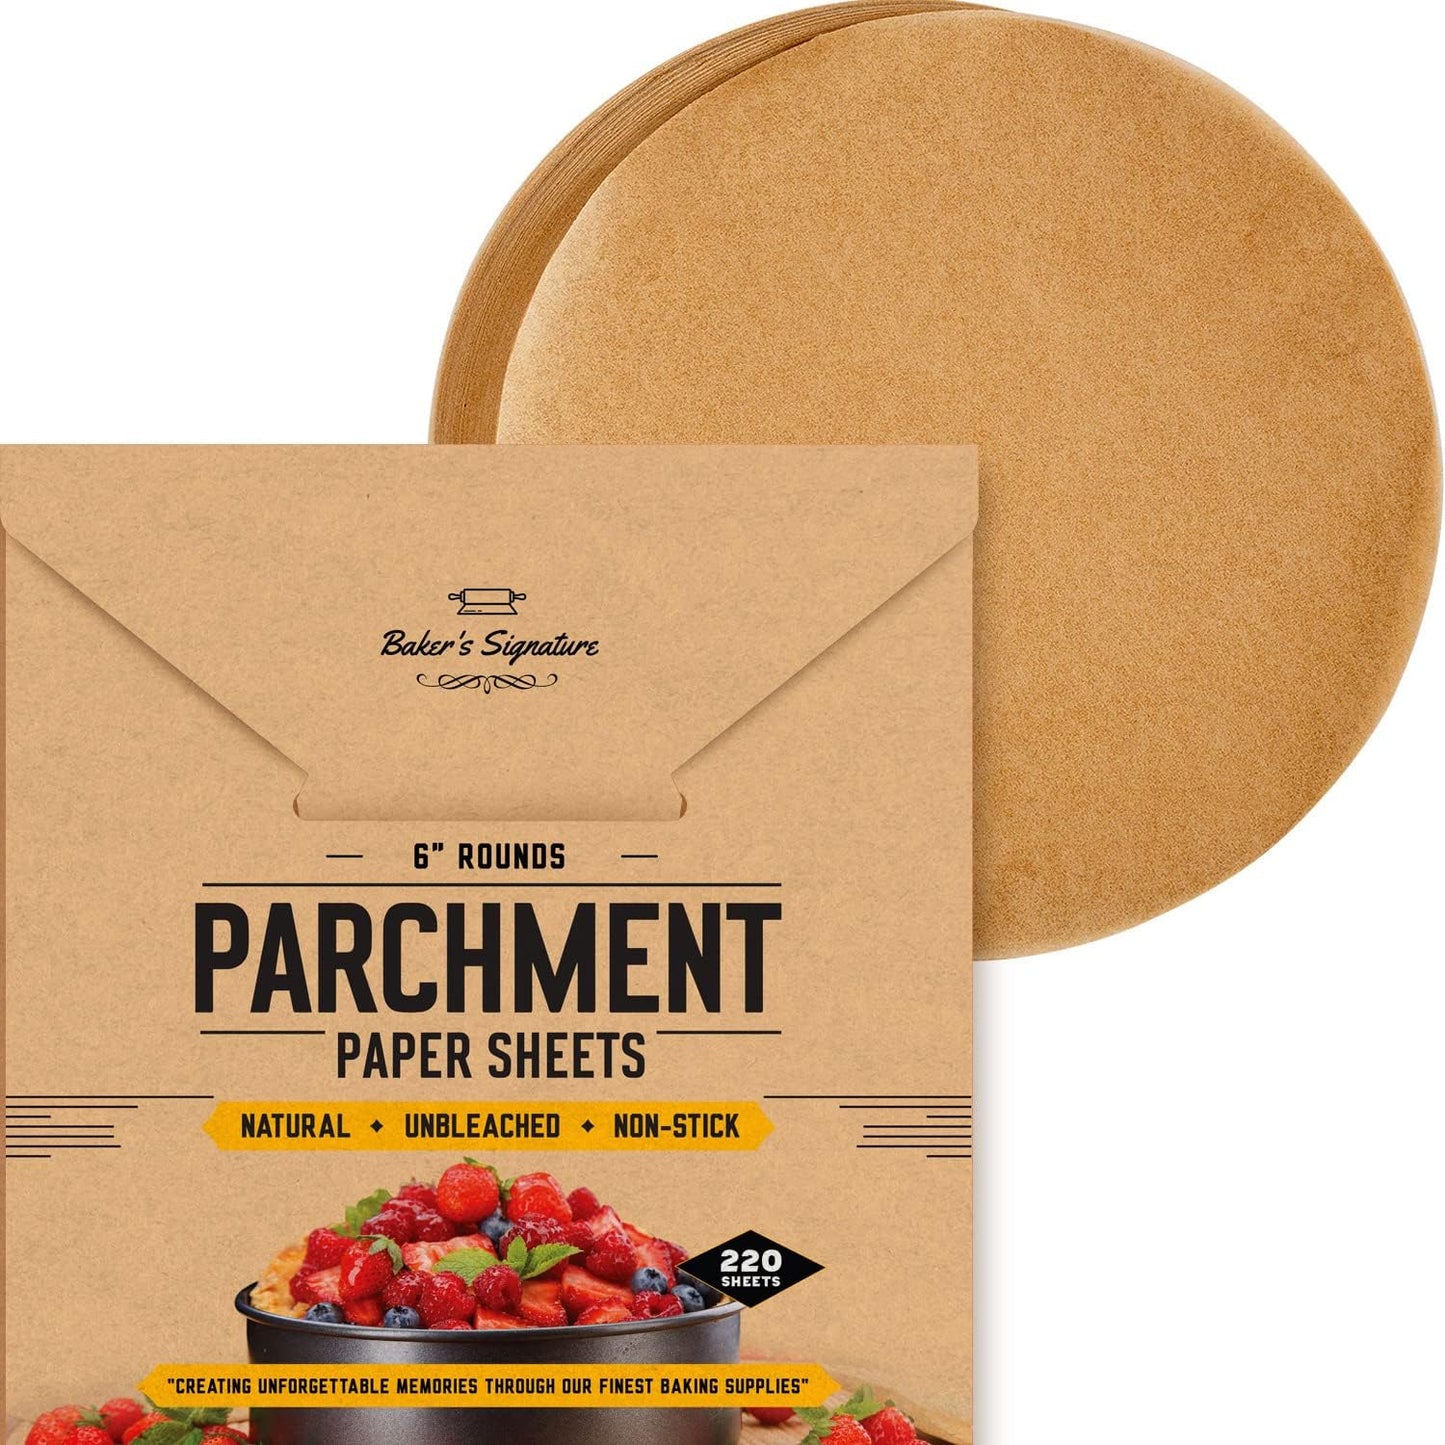 6 Inch Rounds Pack of 220 Parchment Paper Baking Sheets by Baker’s Signature | Precut Silicone Coated & Unbleached – Will Not Curl or Burn – Non-Toxic & Comes in Convenient Packaging